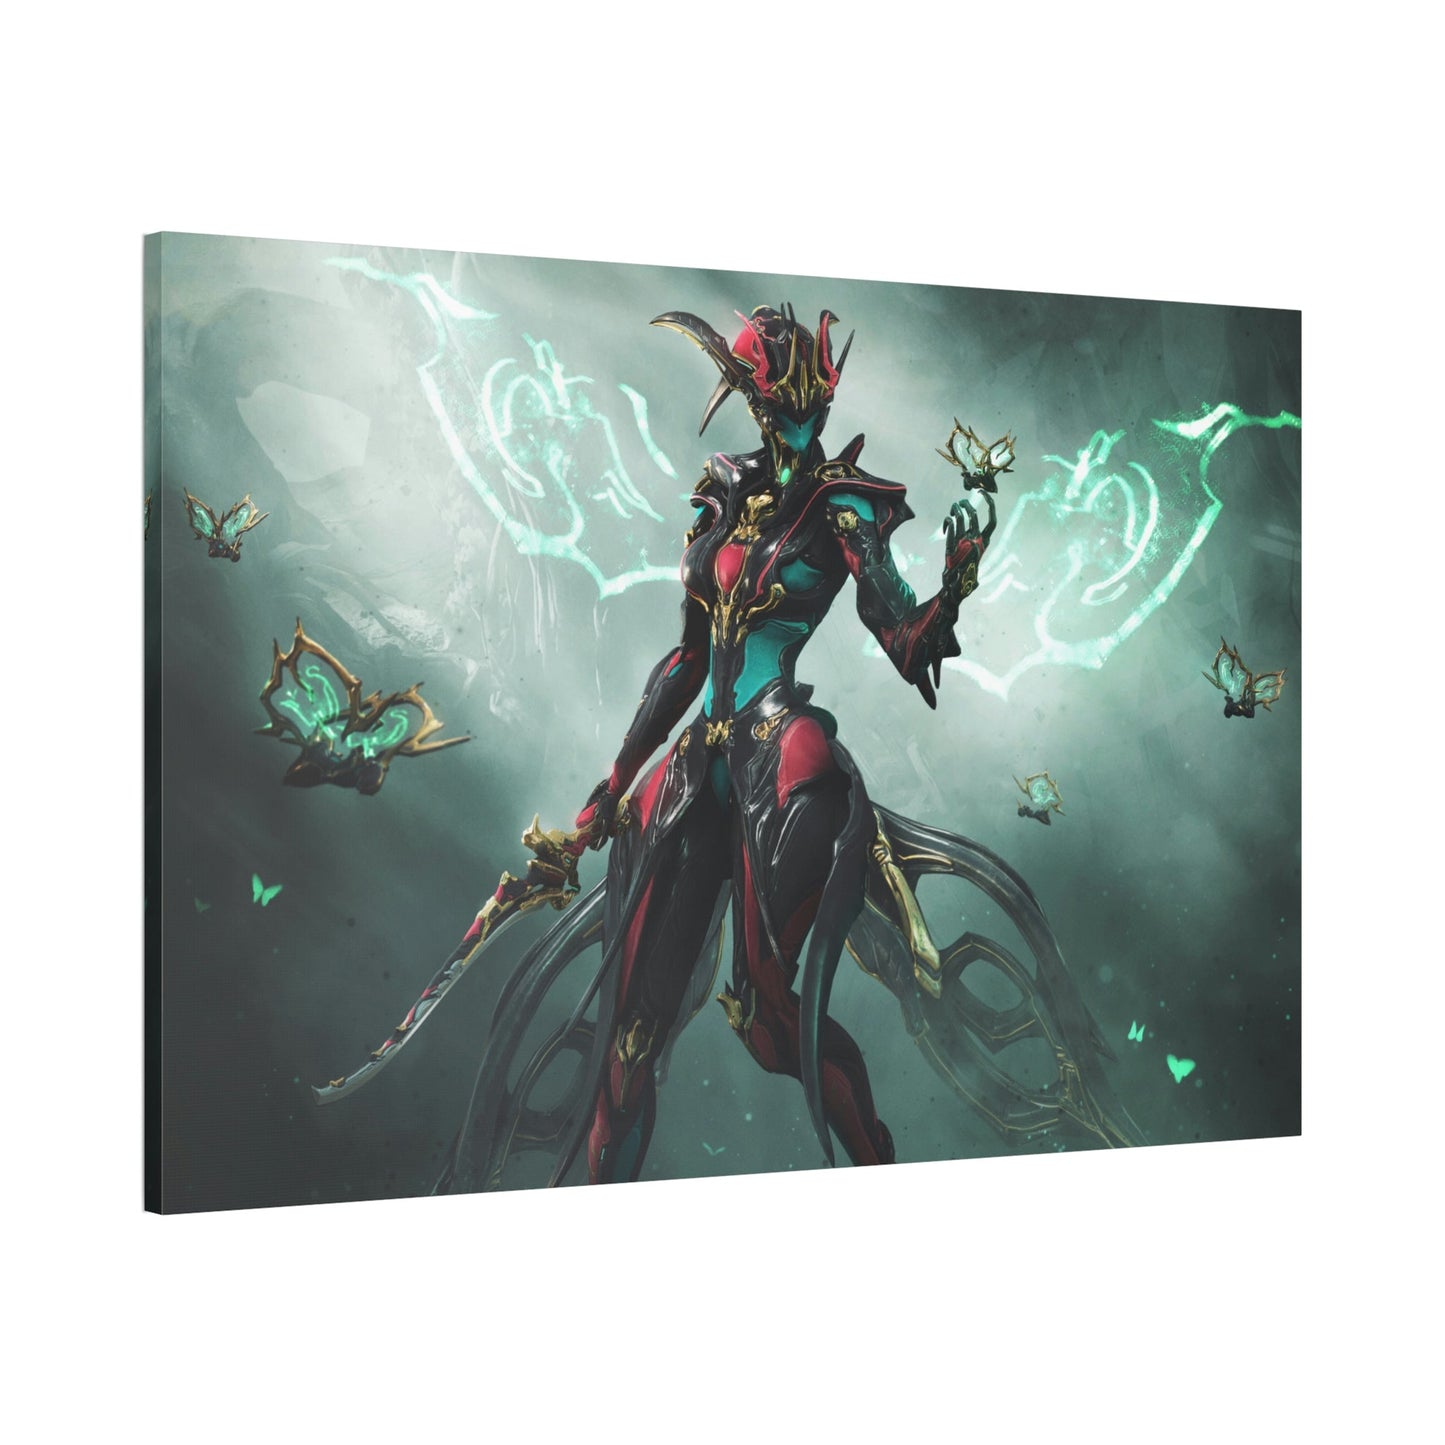 Warframe's Best Moments: A Collection of Canvas Art Prints for Fans of the Game